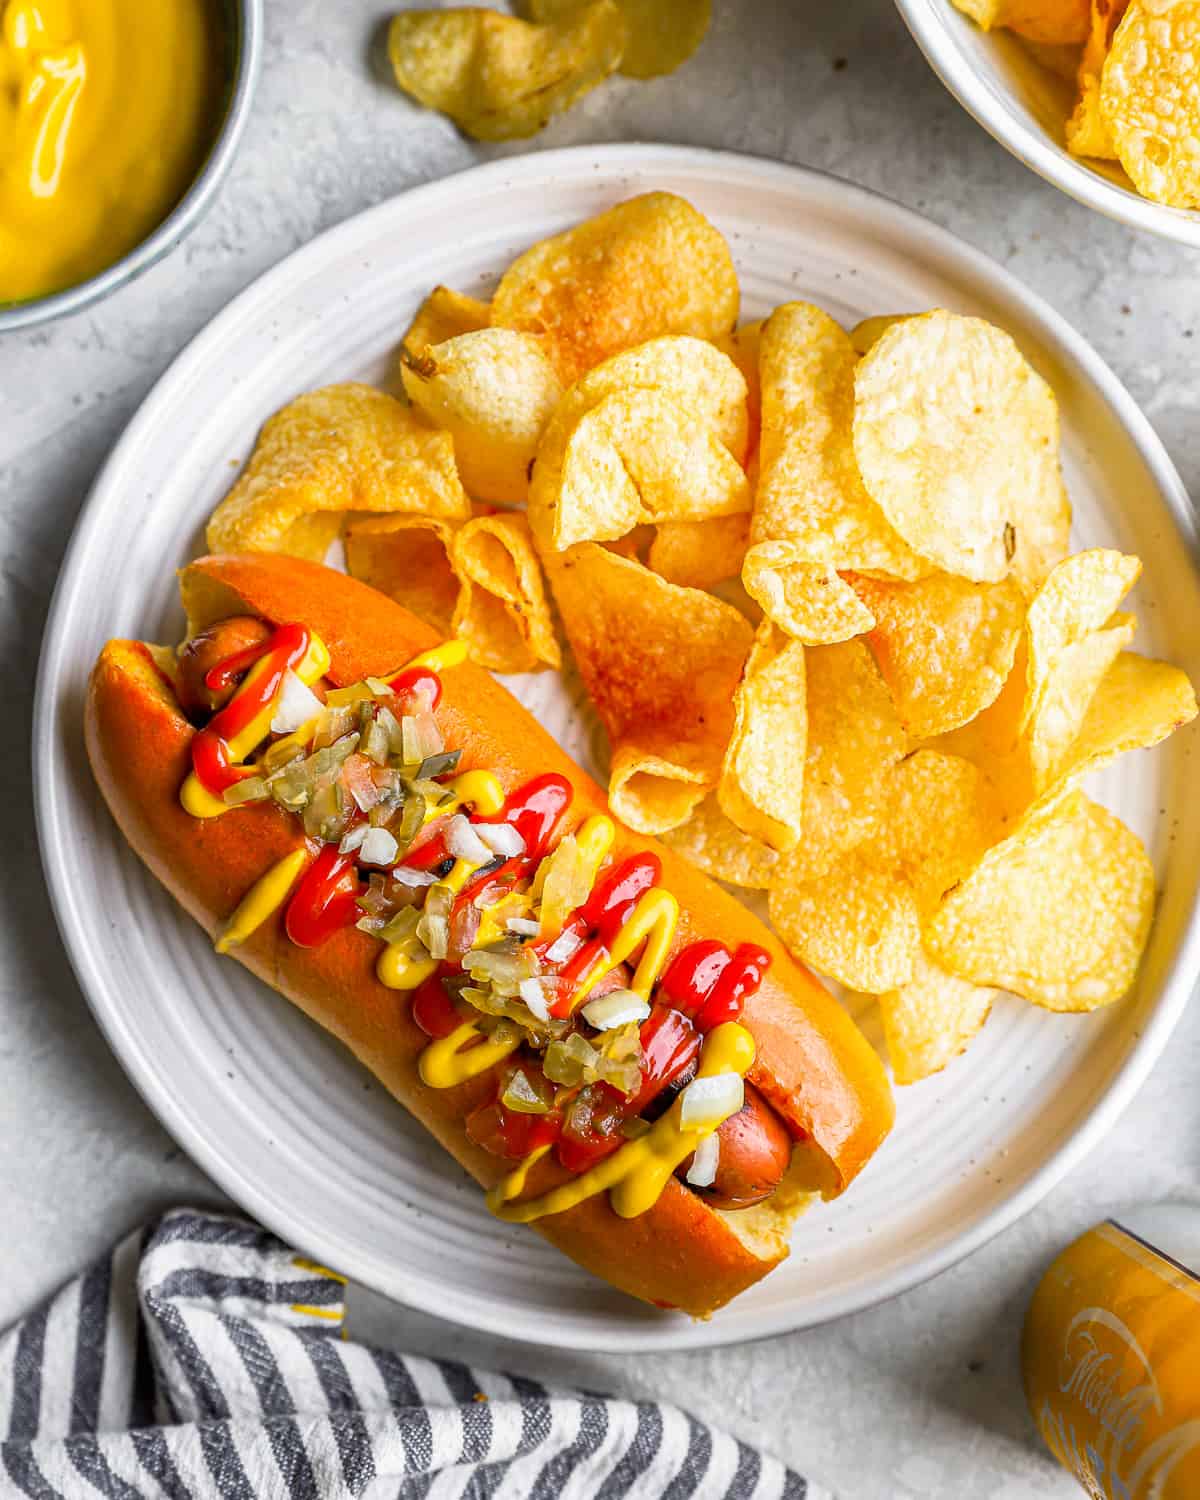 overhead view of a hot dog wit toppings on a white plate with potato chips.